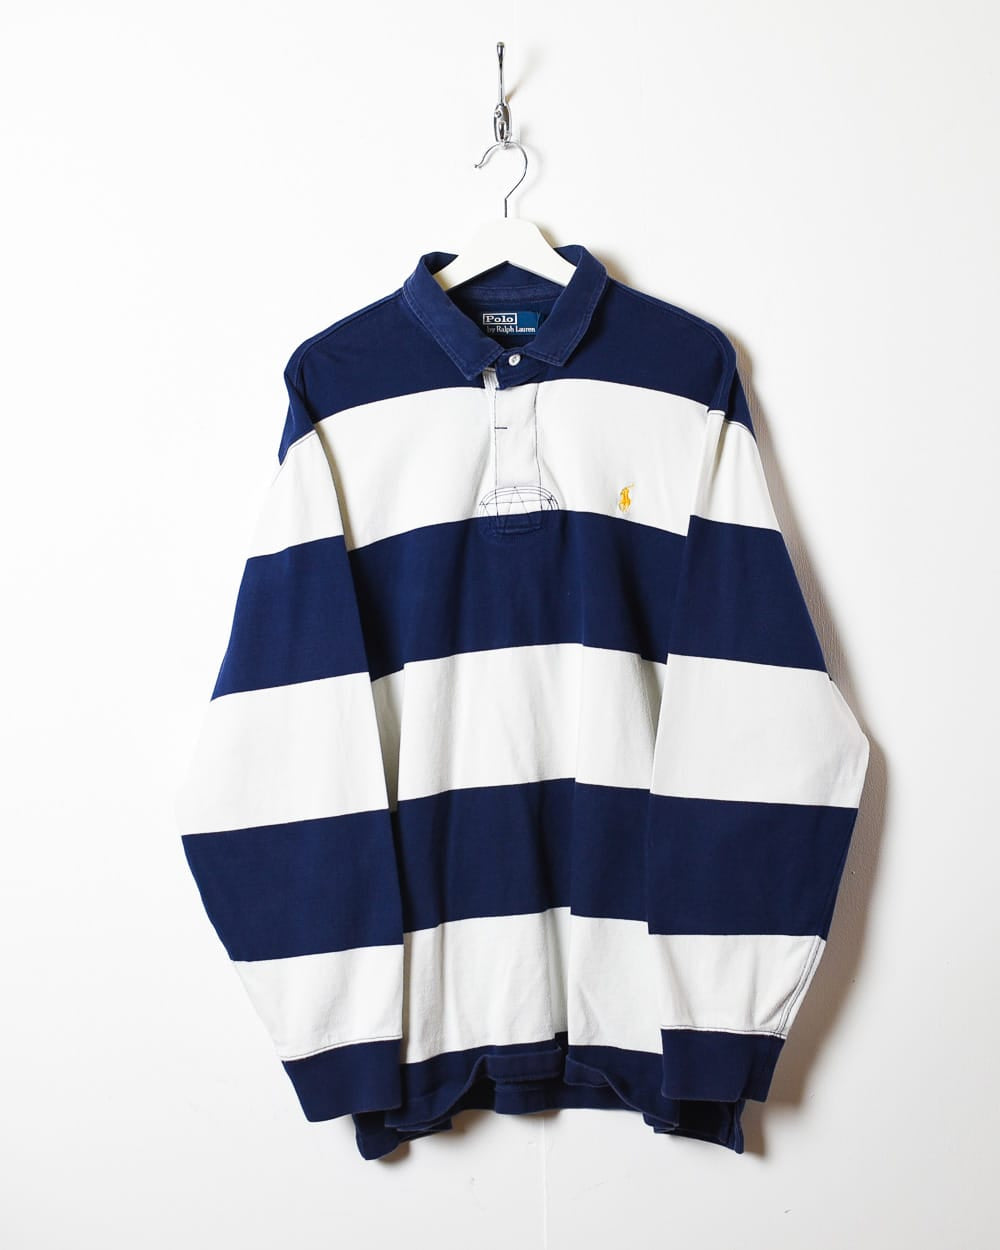 Navy Polo Ralph Lauren Striped Rugby Shirt - XX-Large